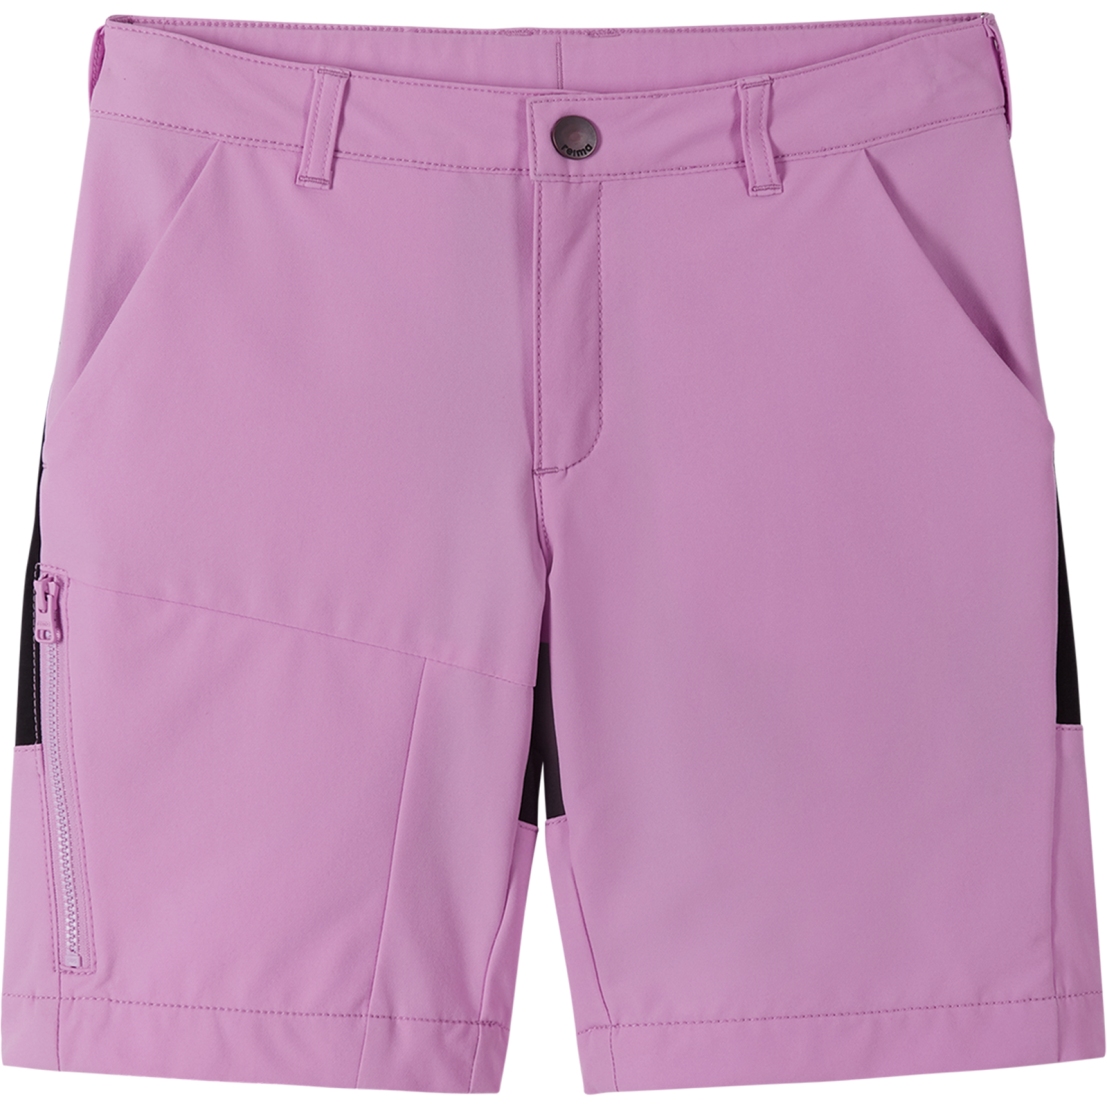 Picture of Reima Vaelsi Shorts Junior - lilac pink 4200